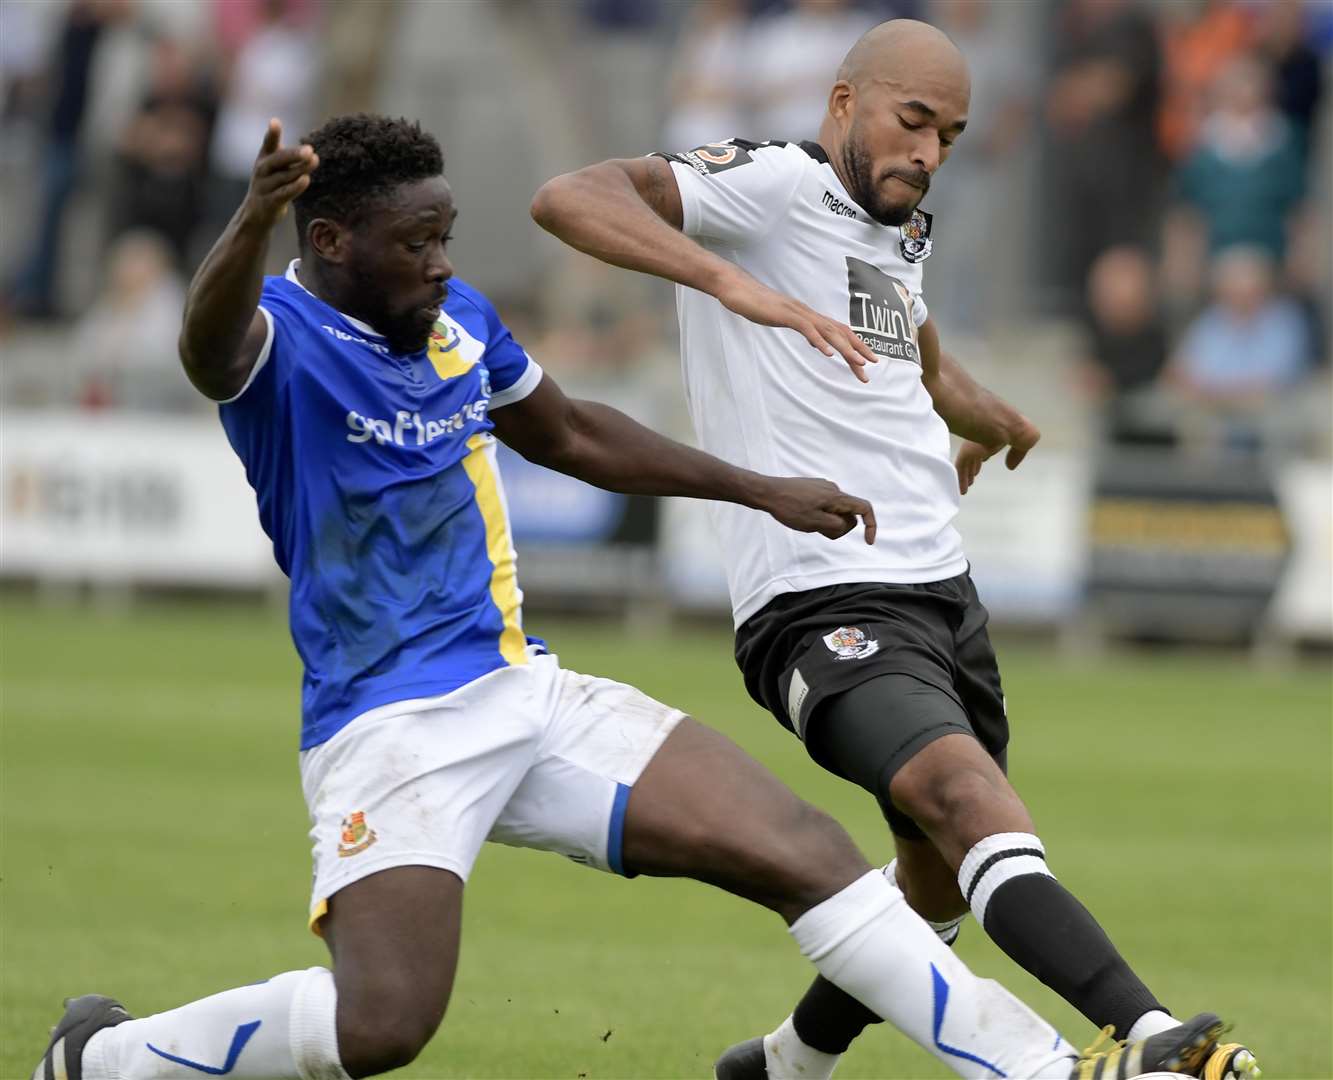 Delano Sam-Yorke puts his foot in for Dartford against Wealdstone Picture: Andy Payton